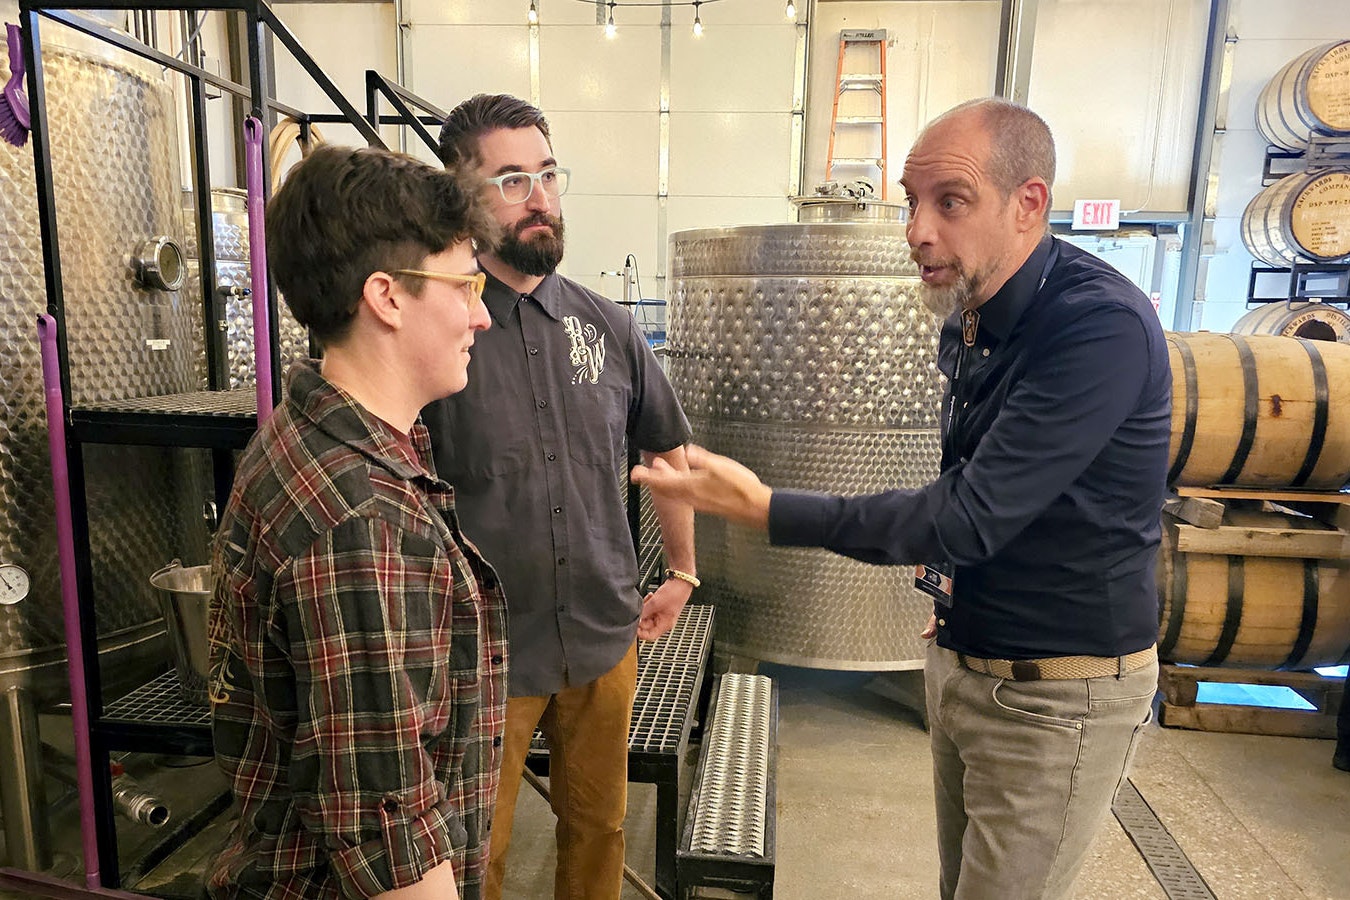 Christian Josso, right, from Italy talks to Amber and Chad Pollock about starting his whiskey tour at Backwards Distilling in Casper.